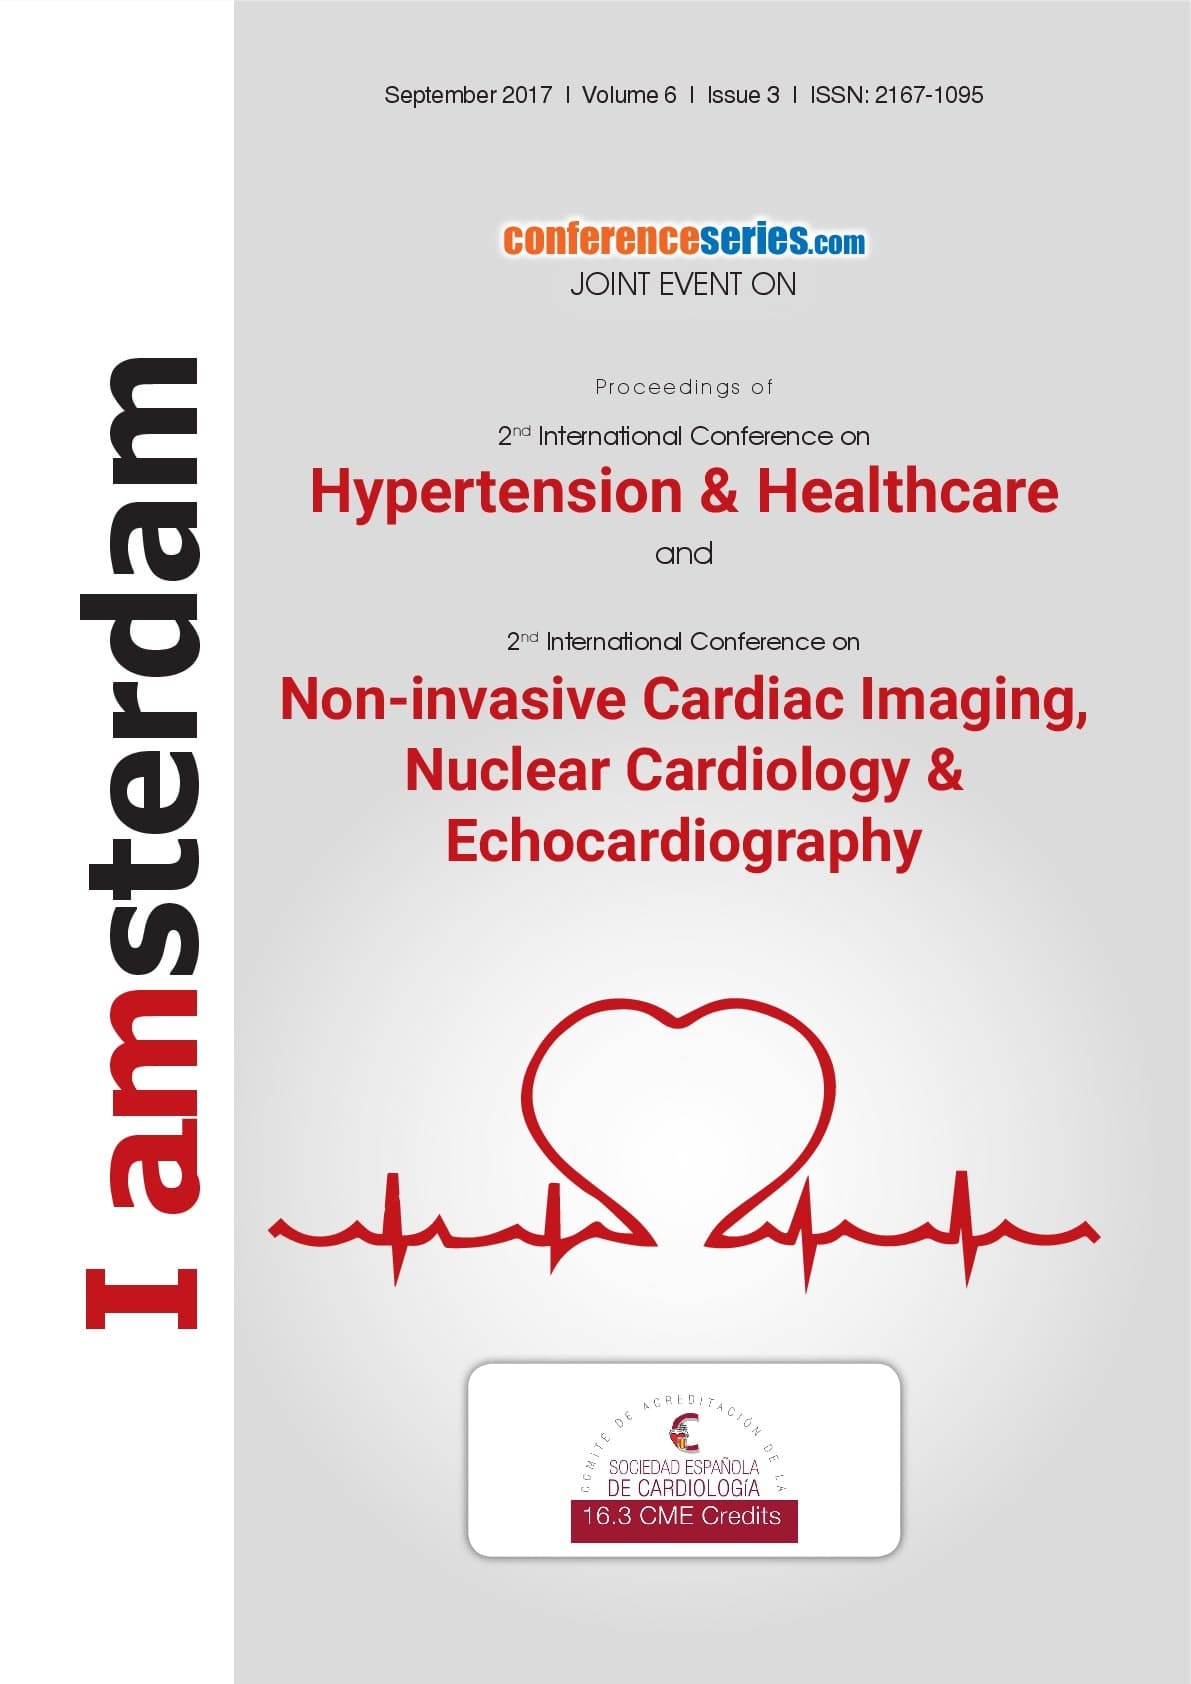 JOINT EVENT ON 2nd International Conference on Hypertension & Healthcare and 2nd International Conference on Non-invasive Cardiac Imaging, Nuclear Cardiology & Echocardiograph